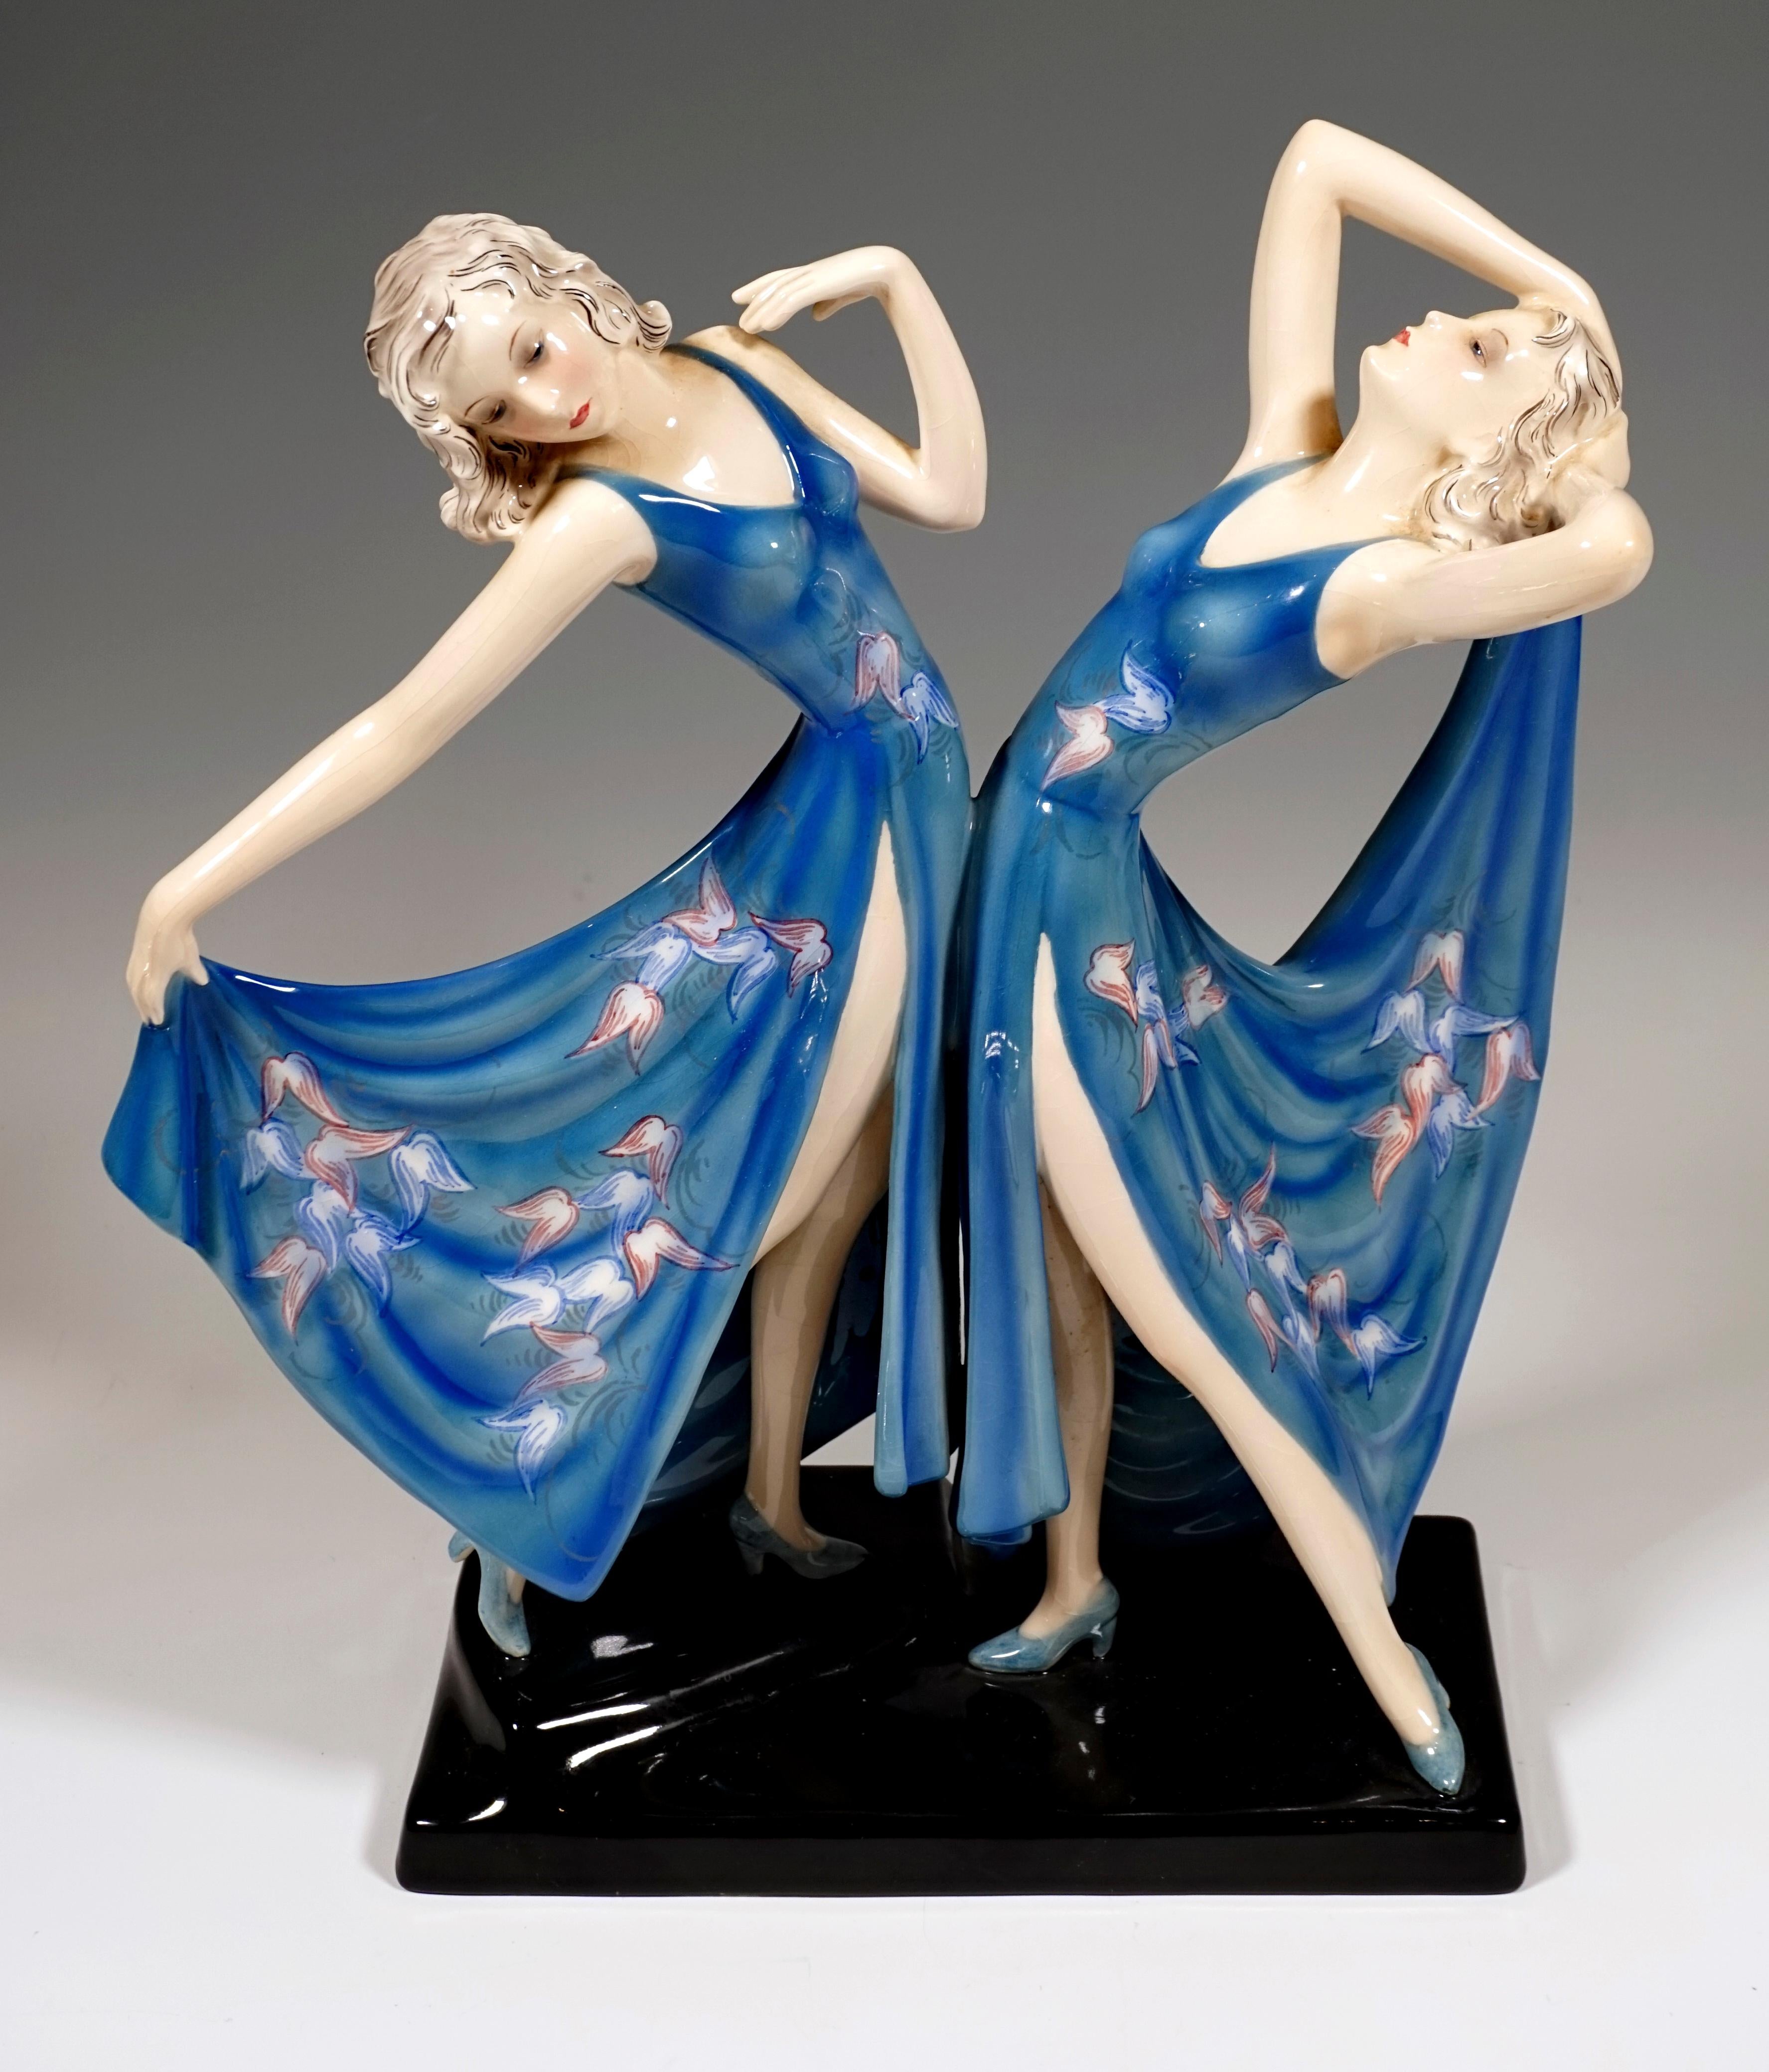 Hand-Crafted Goldscheider Art Déco Twin Dancers 'Dolly Sisters', by Stephan Dakon, ca 1937